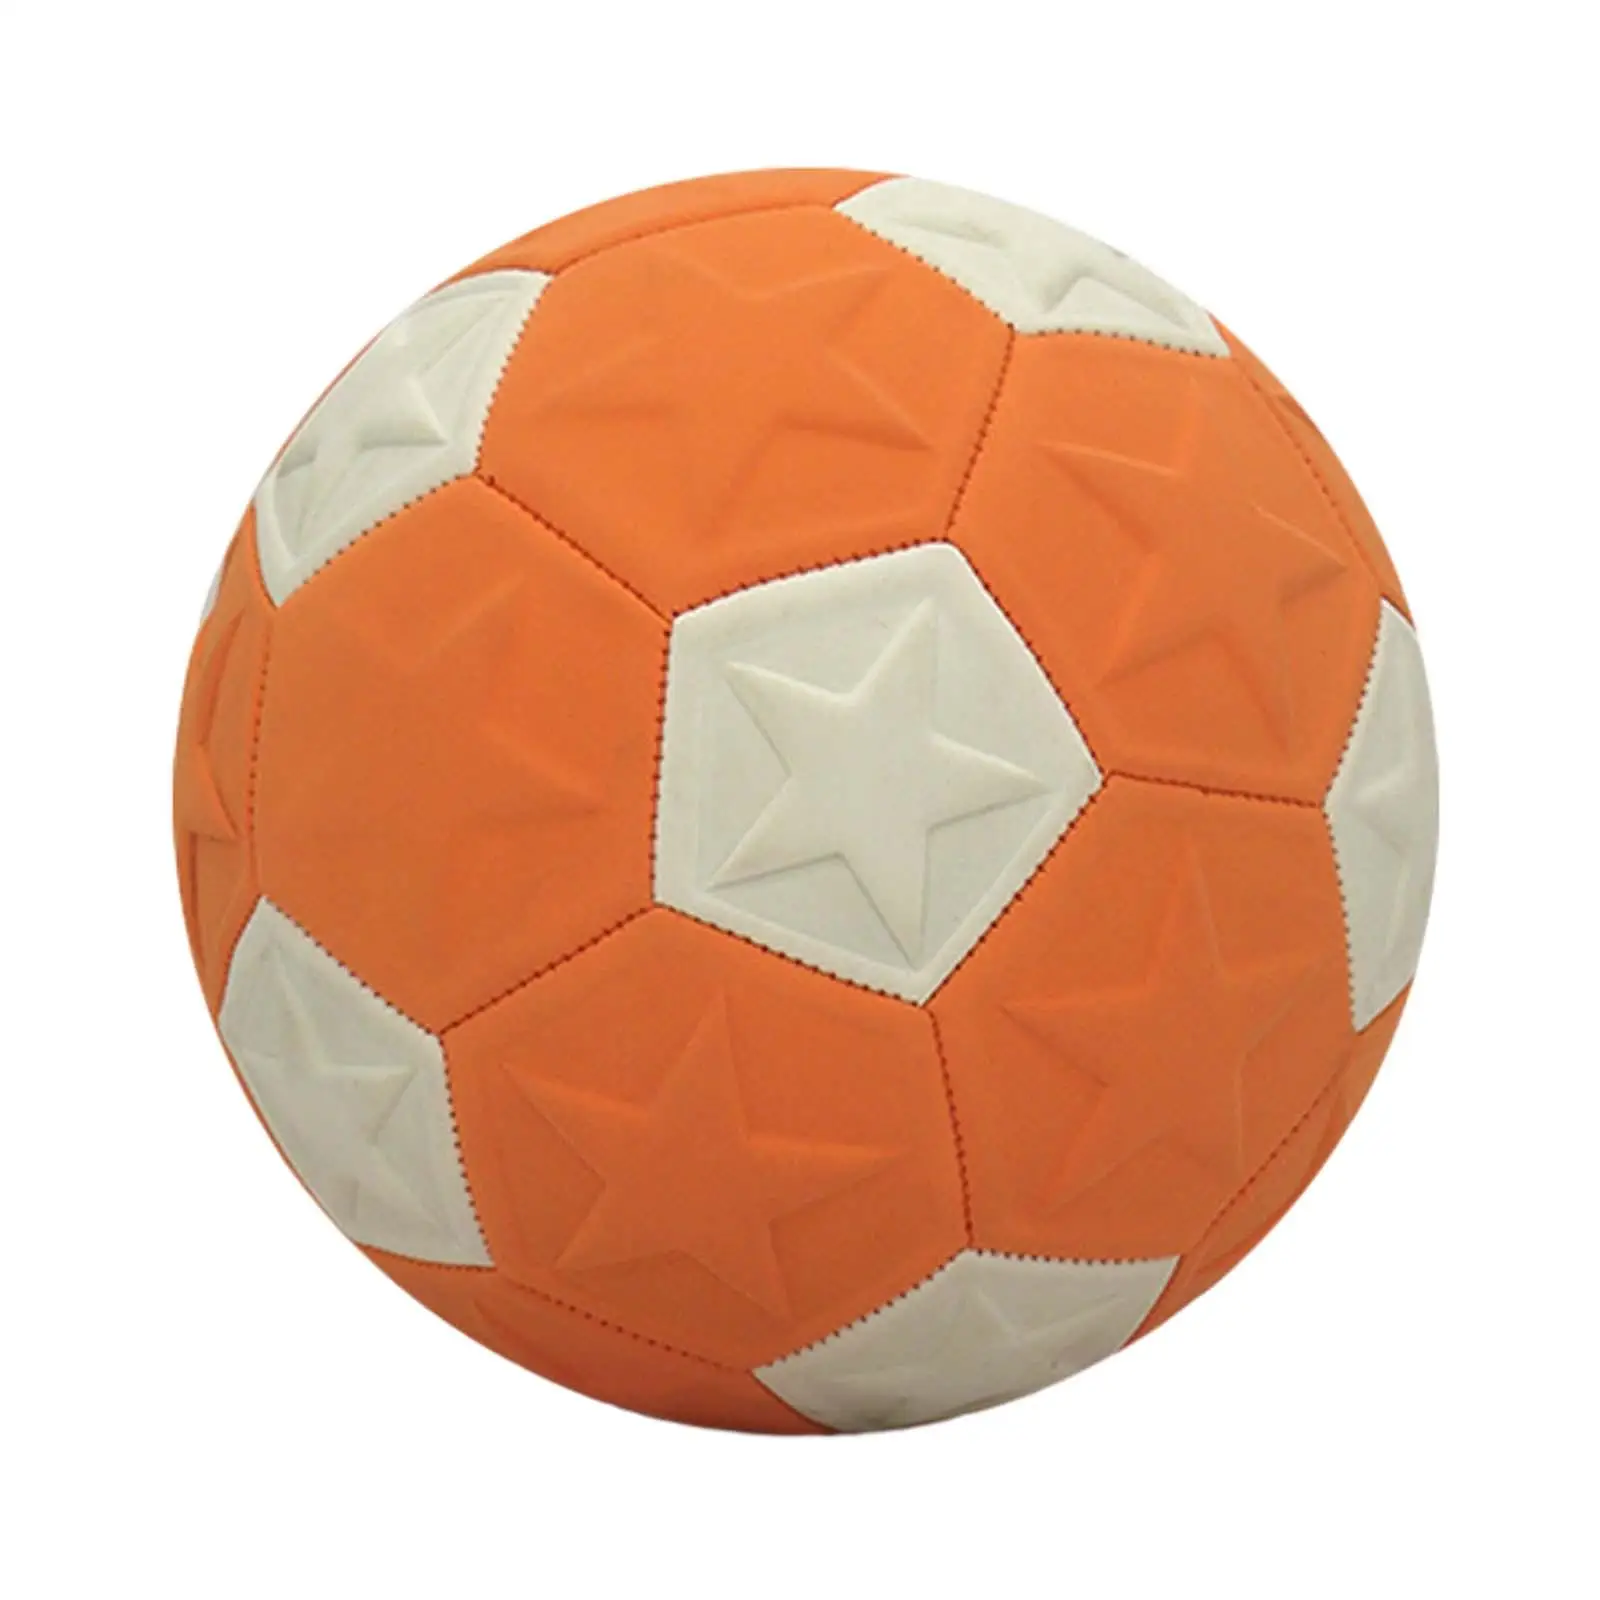 

Soccer Ball Size 4 Games Training Practice Official Match Ball for Toddlers Indoor Outdoor Girls Boys Children Youth Teens